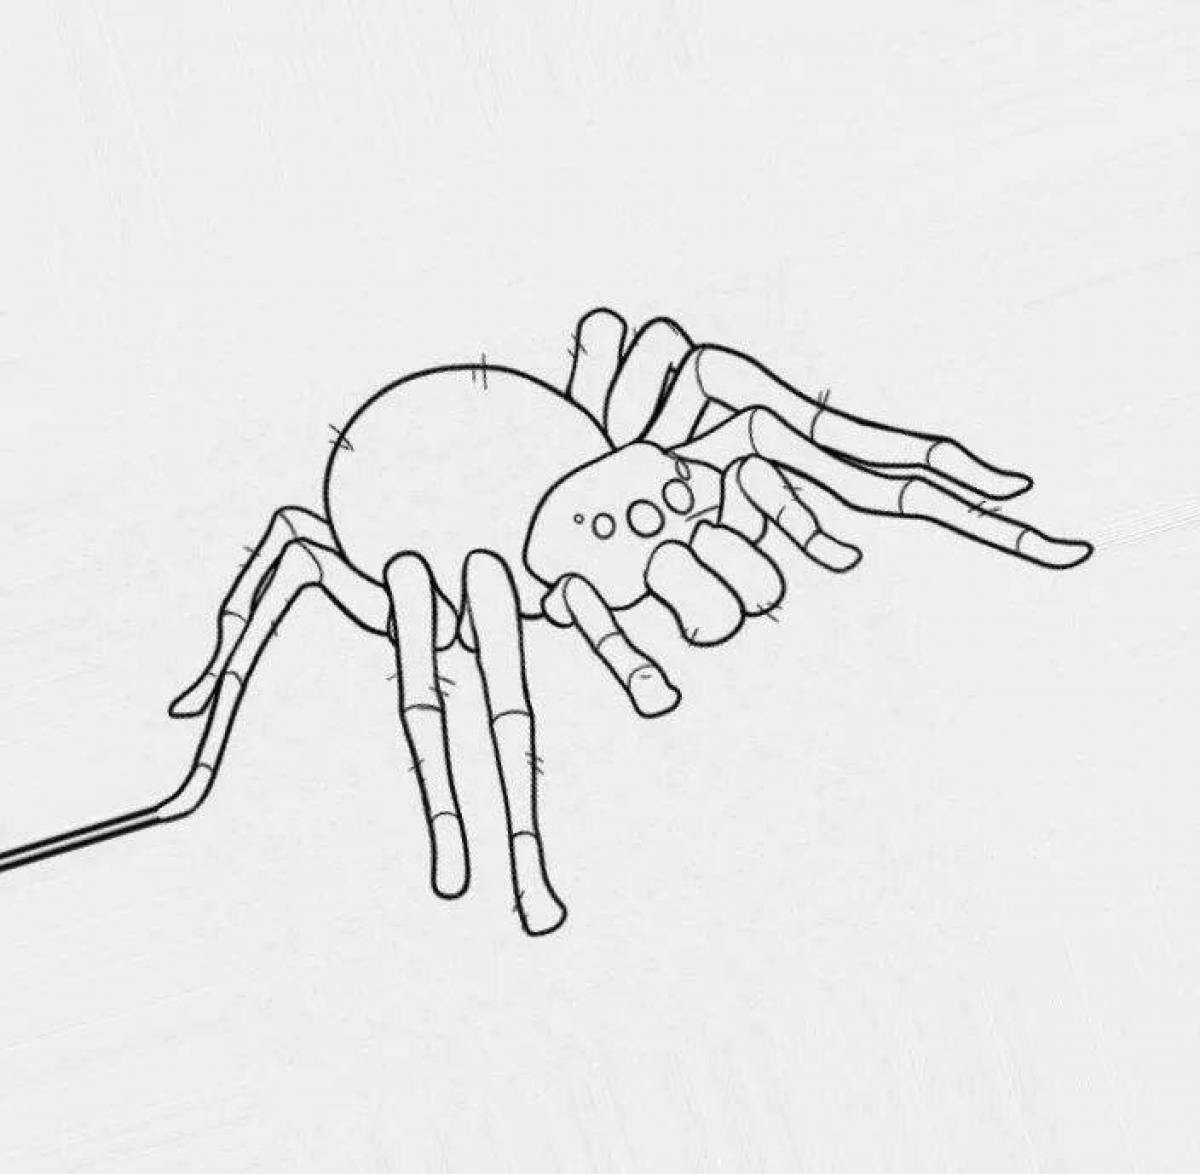 Thomas X's fascinating spider coloring page